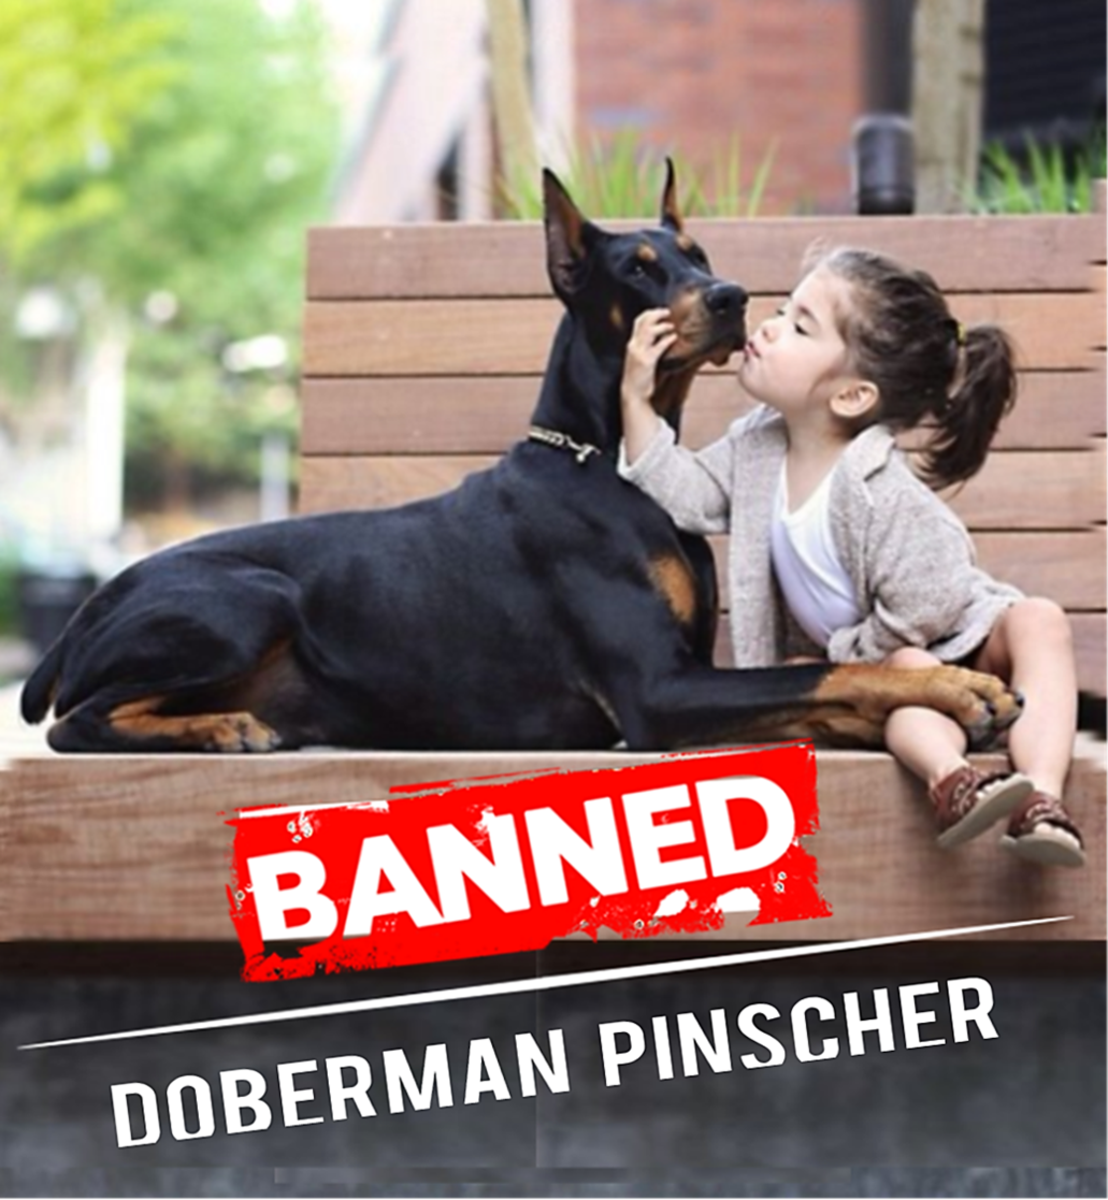 Doberman Pinscher Dogs are Banned or Restricted in countries